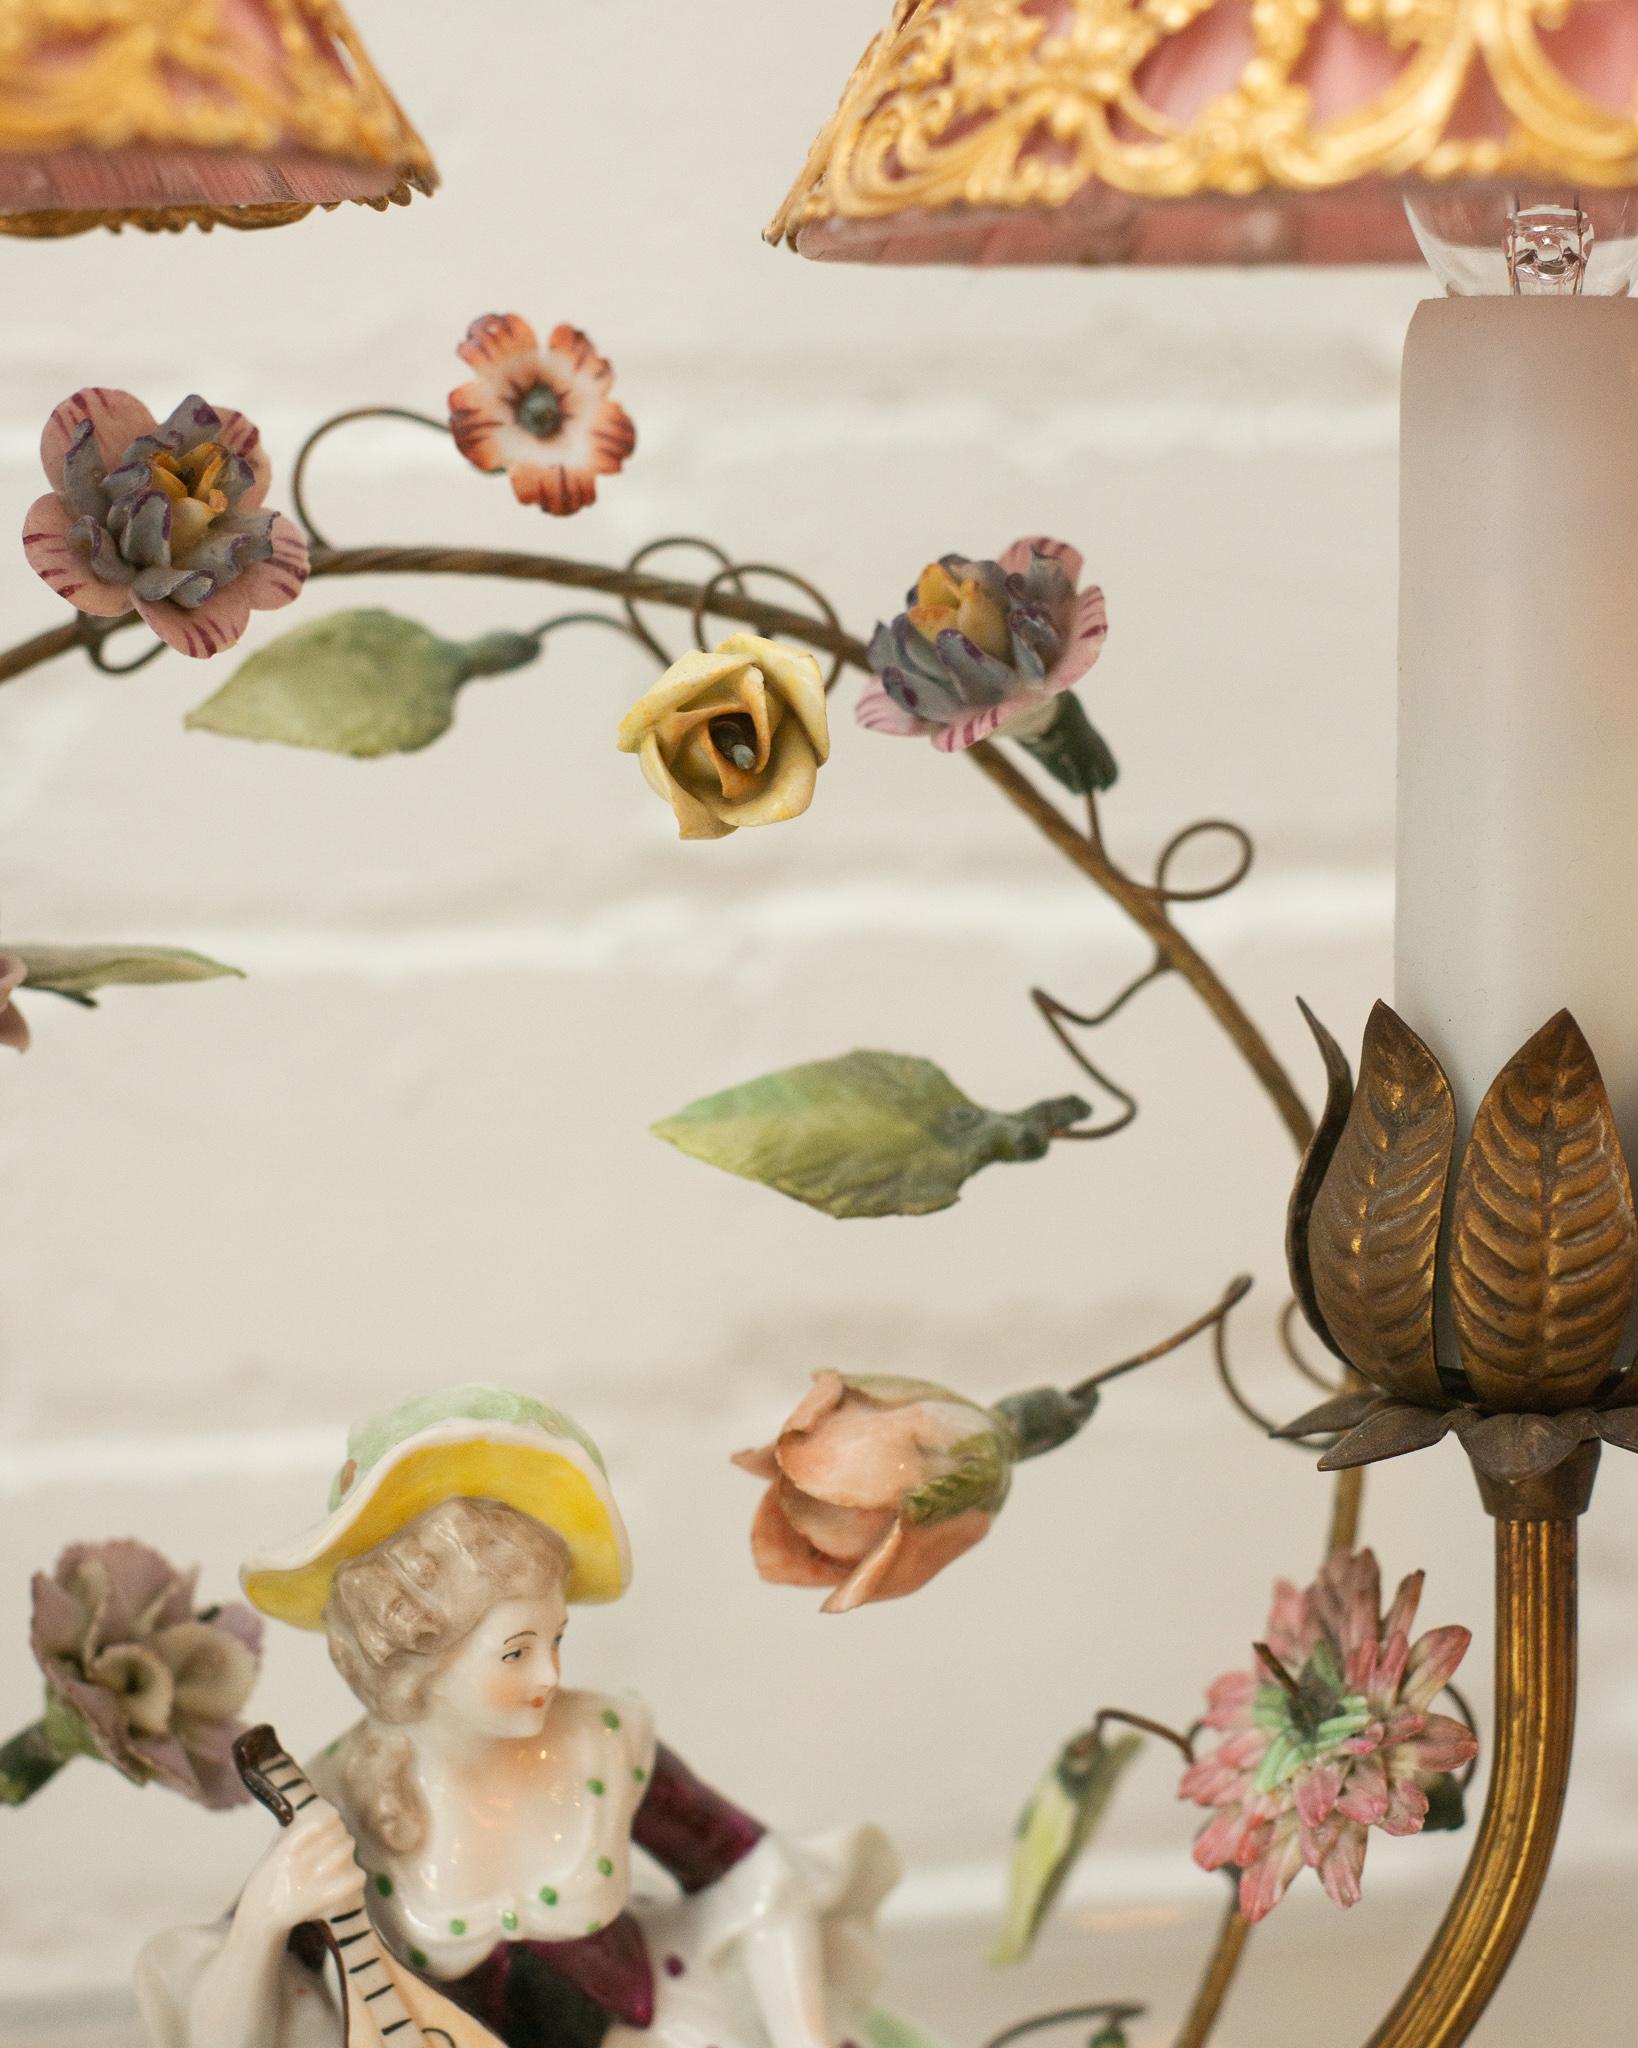 antique lamps with flowers